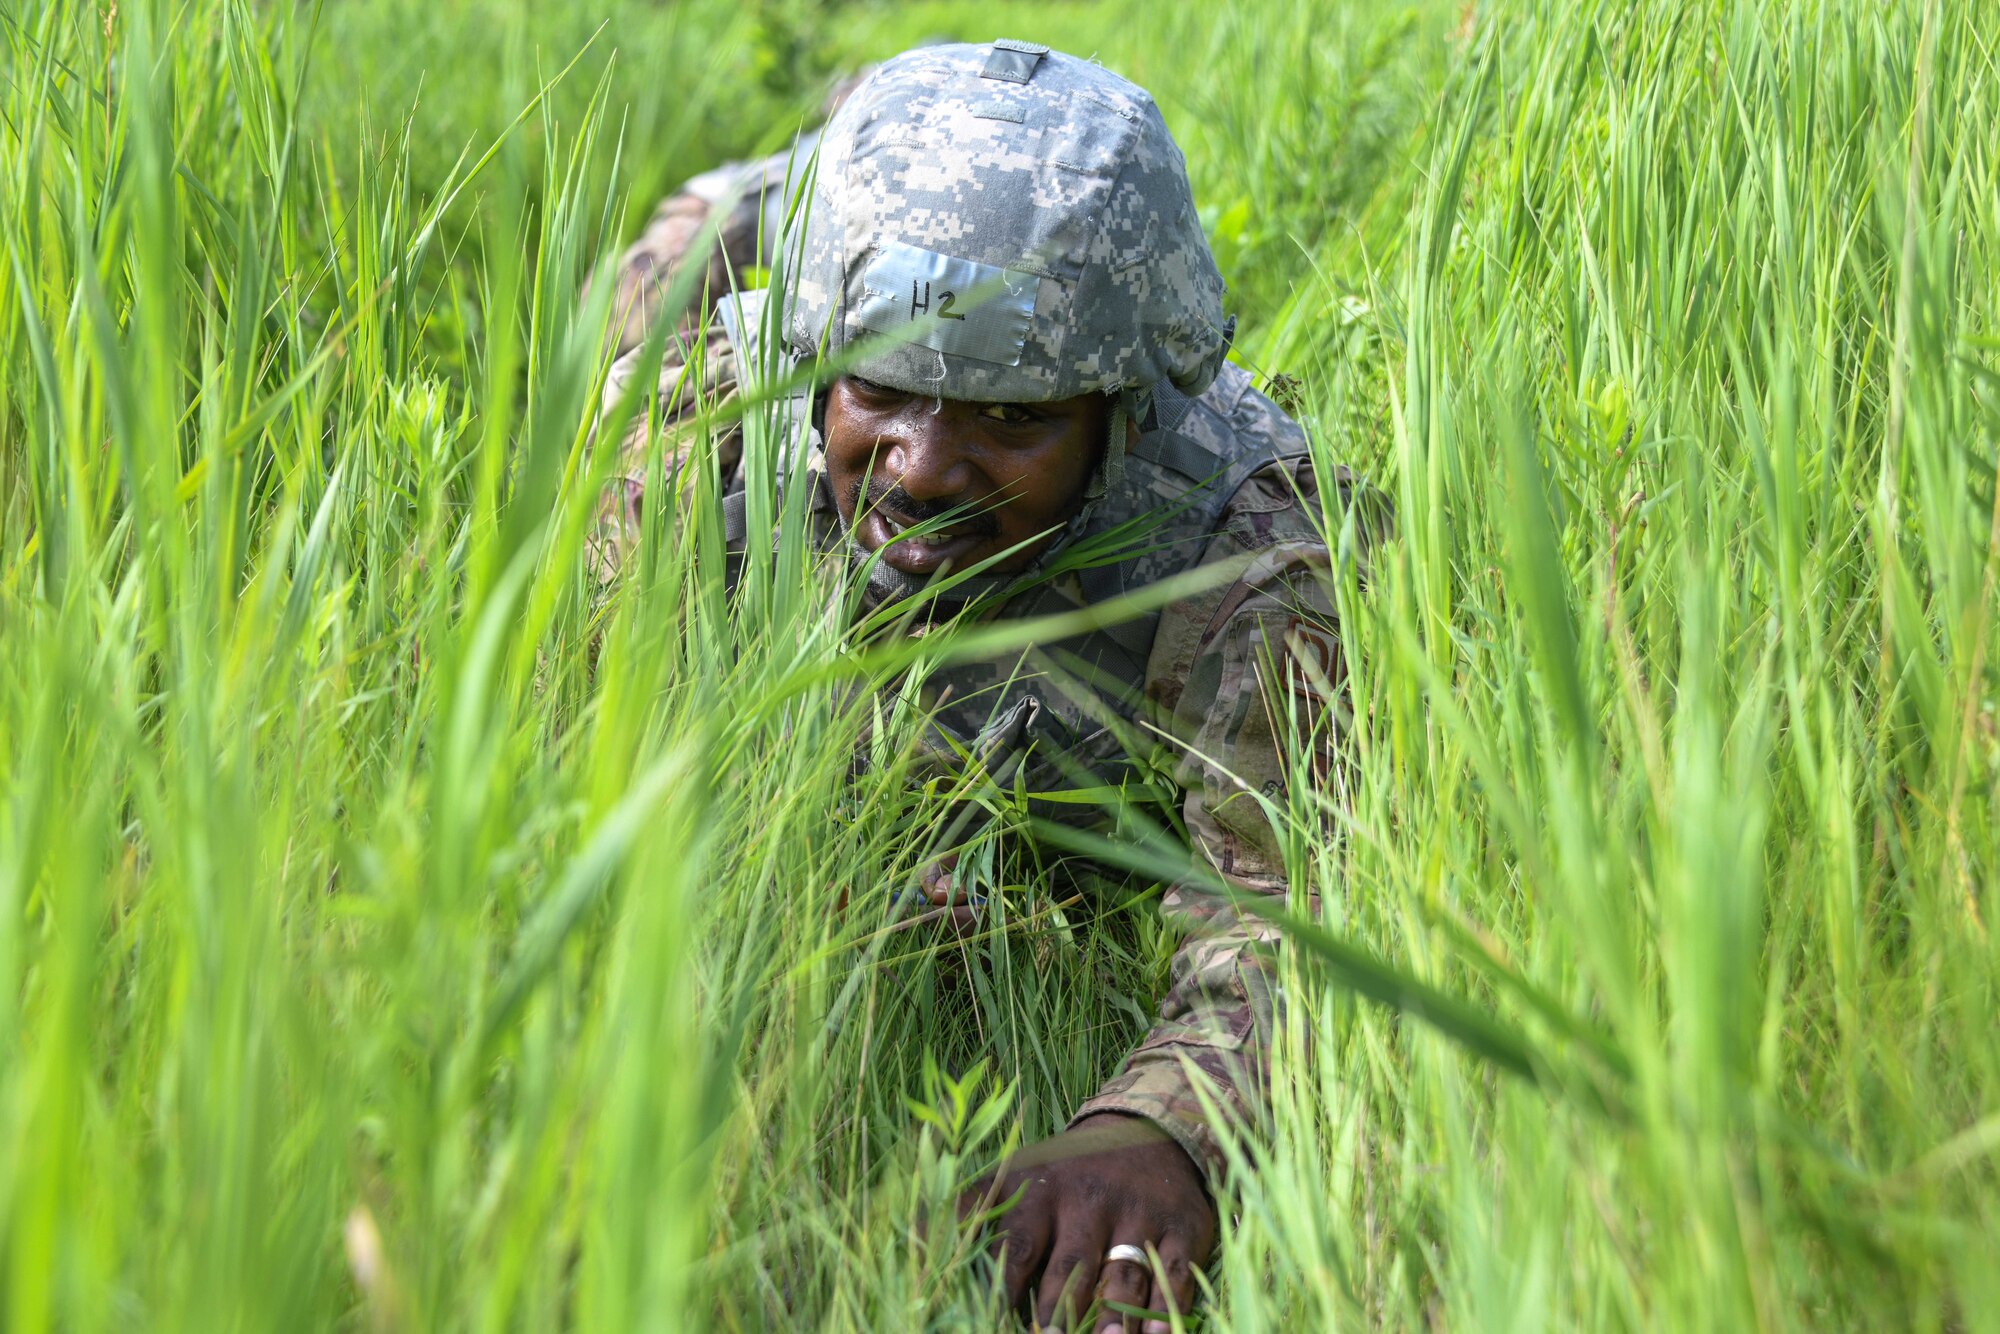 An Airman from the  319th Civil Engineer Squadron engineering supervisor, low crawls during a Prime Base Engineer Emergency Force training on Grand Forks Air Force Base, North Dakota, July 14, 2022. The goal of Prime BEEF training is to create and maintain civil engineer forces capable of completing multiple objectives at any time. (U.S. Air Force photo by Senior Airman Ashley Richards)